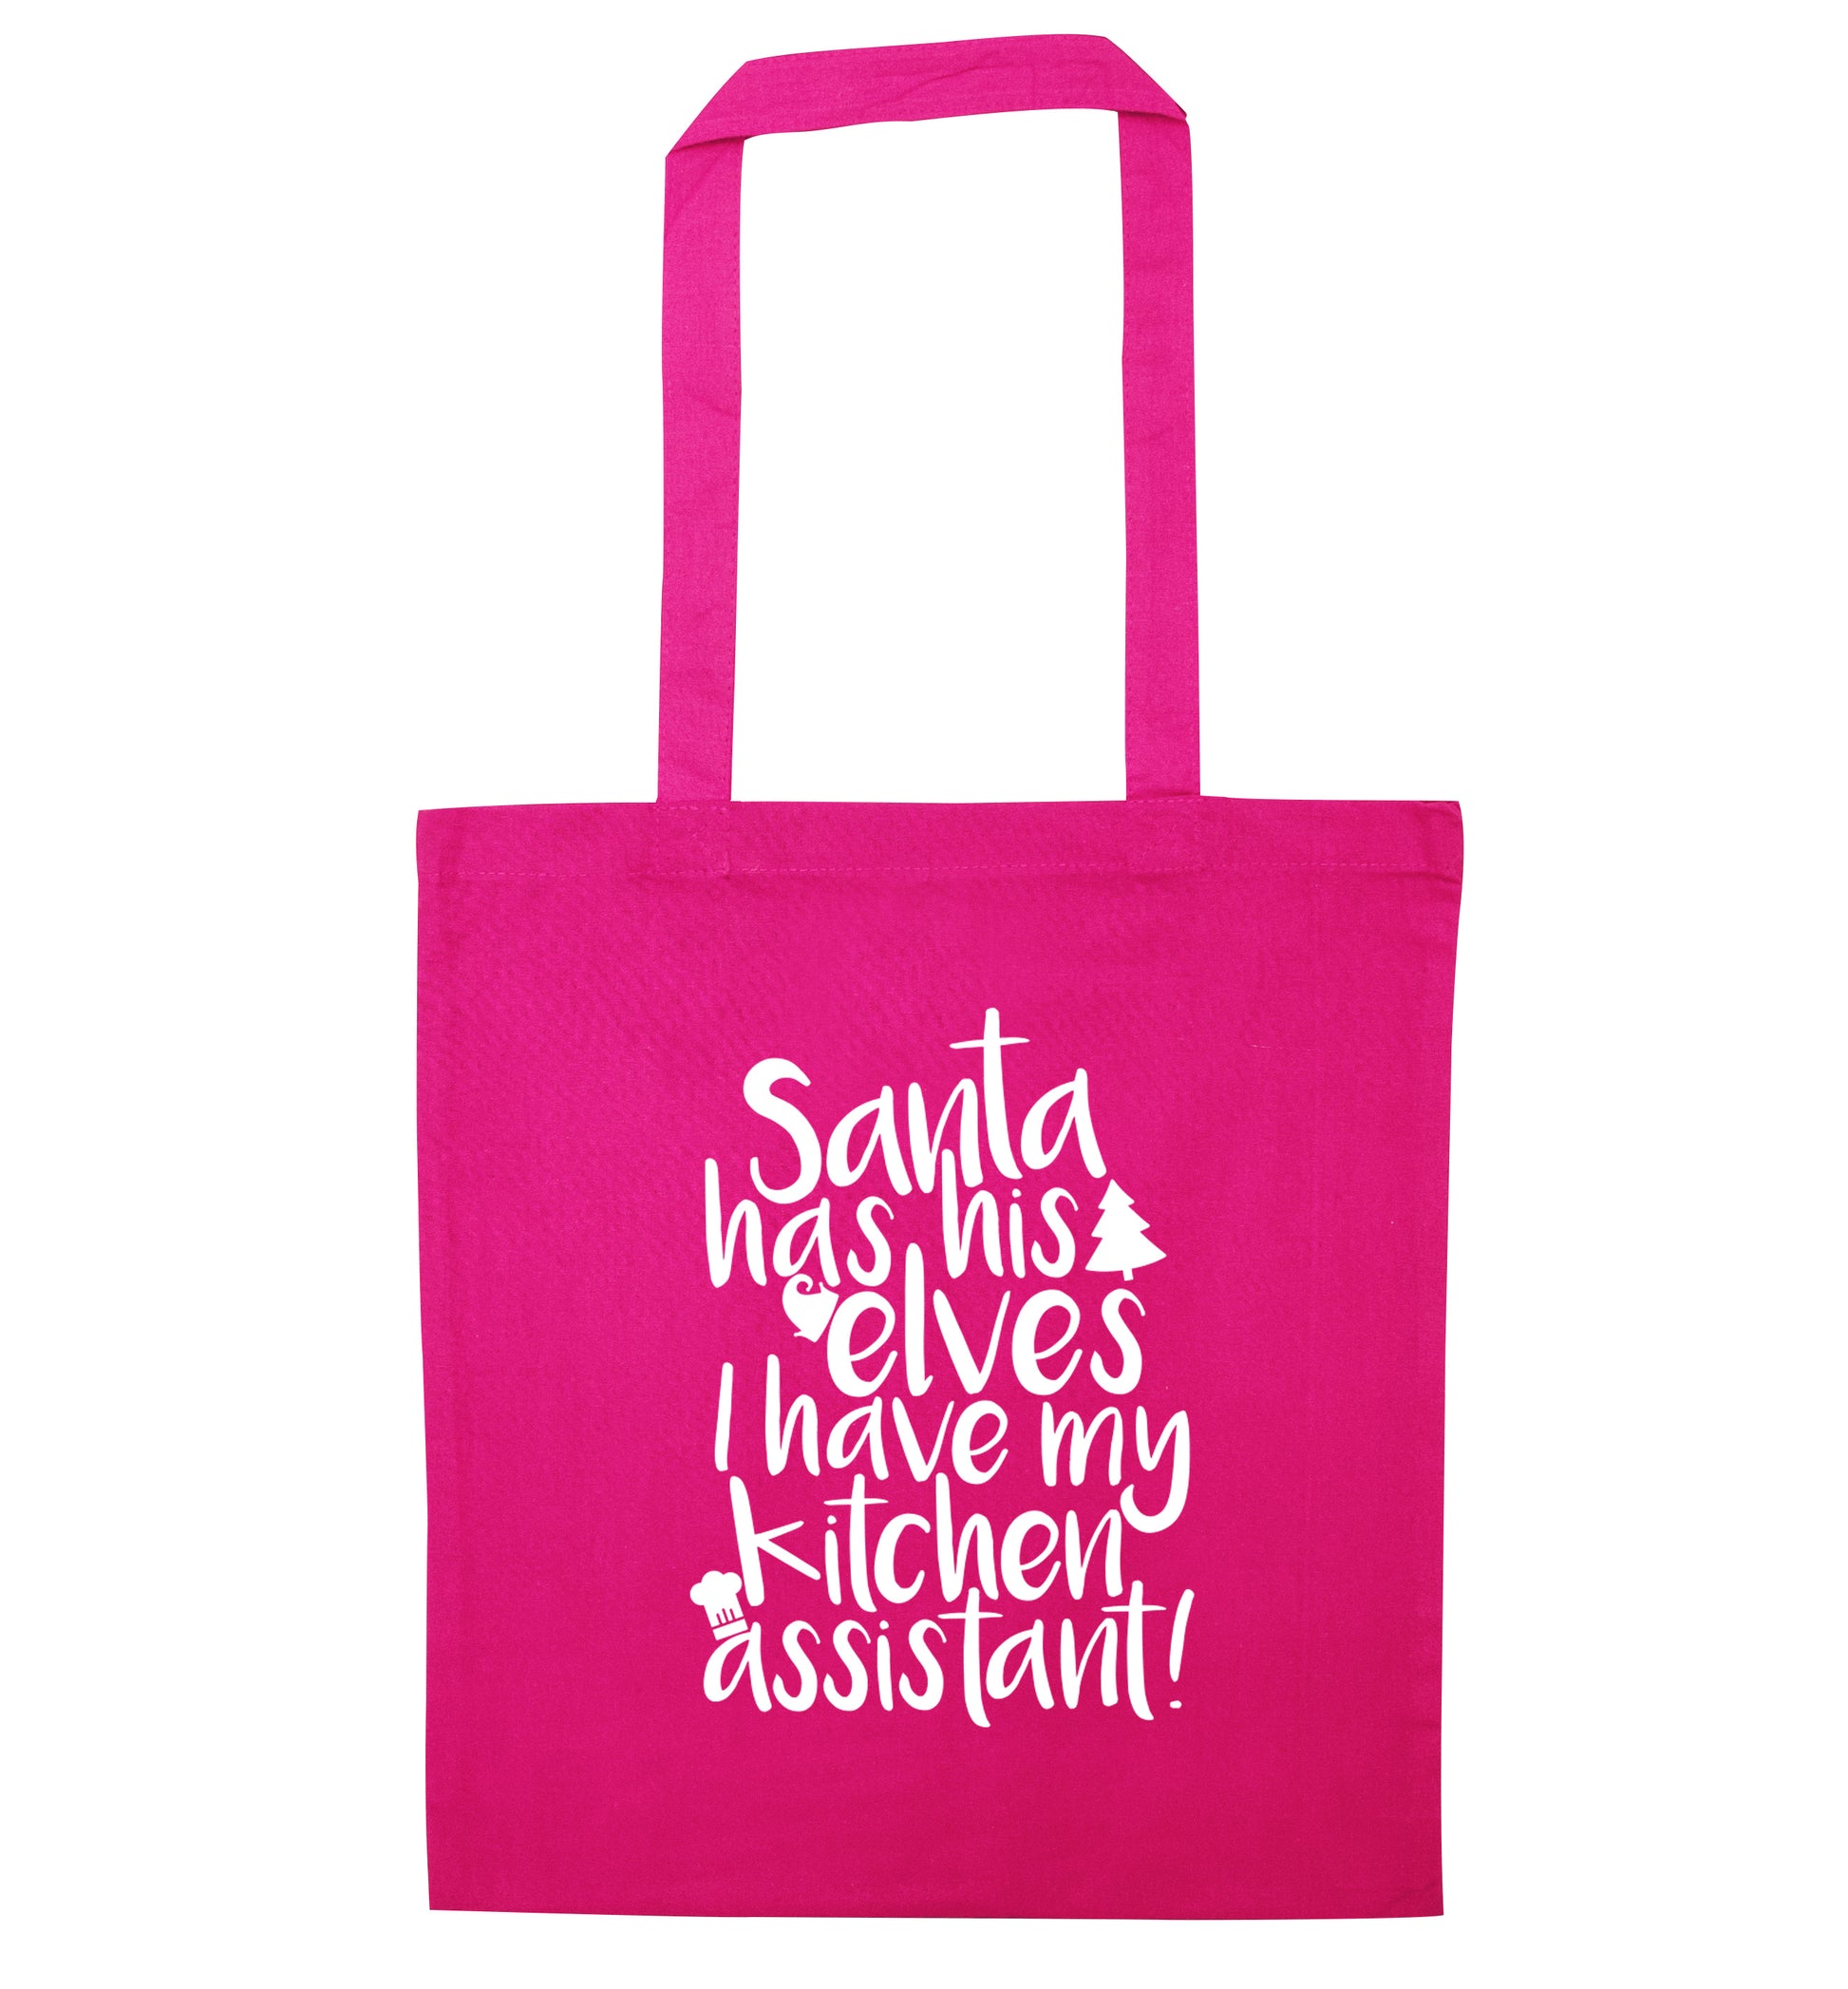 Santa has his elves I have my kitchen assistant pink tote bag